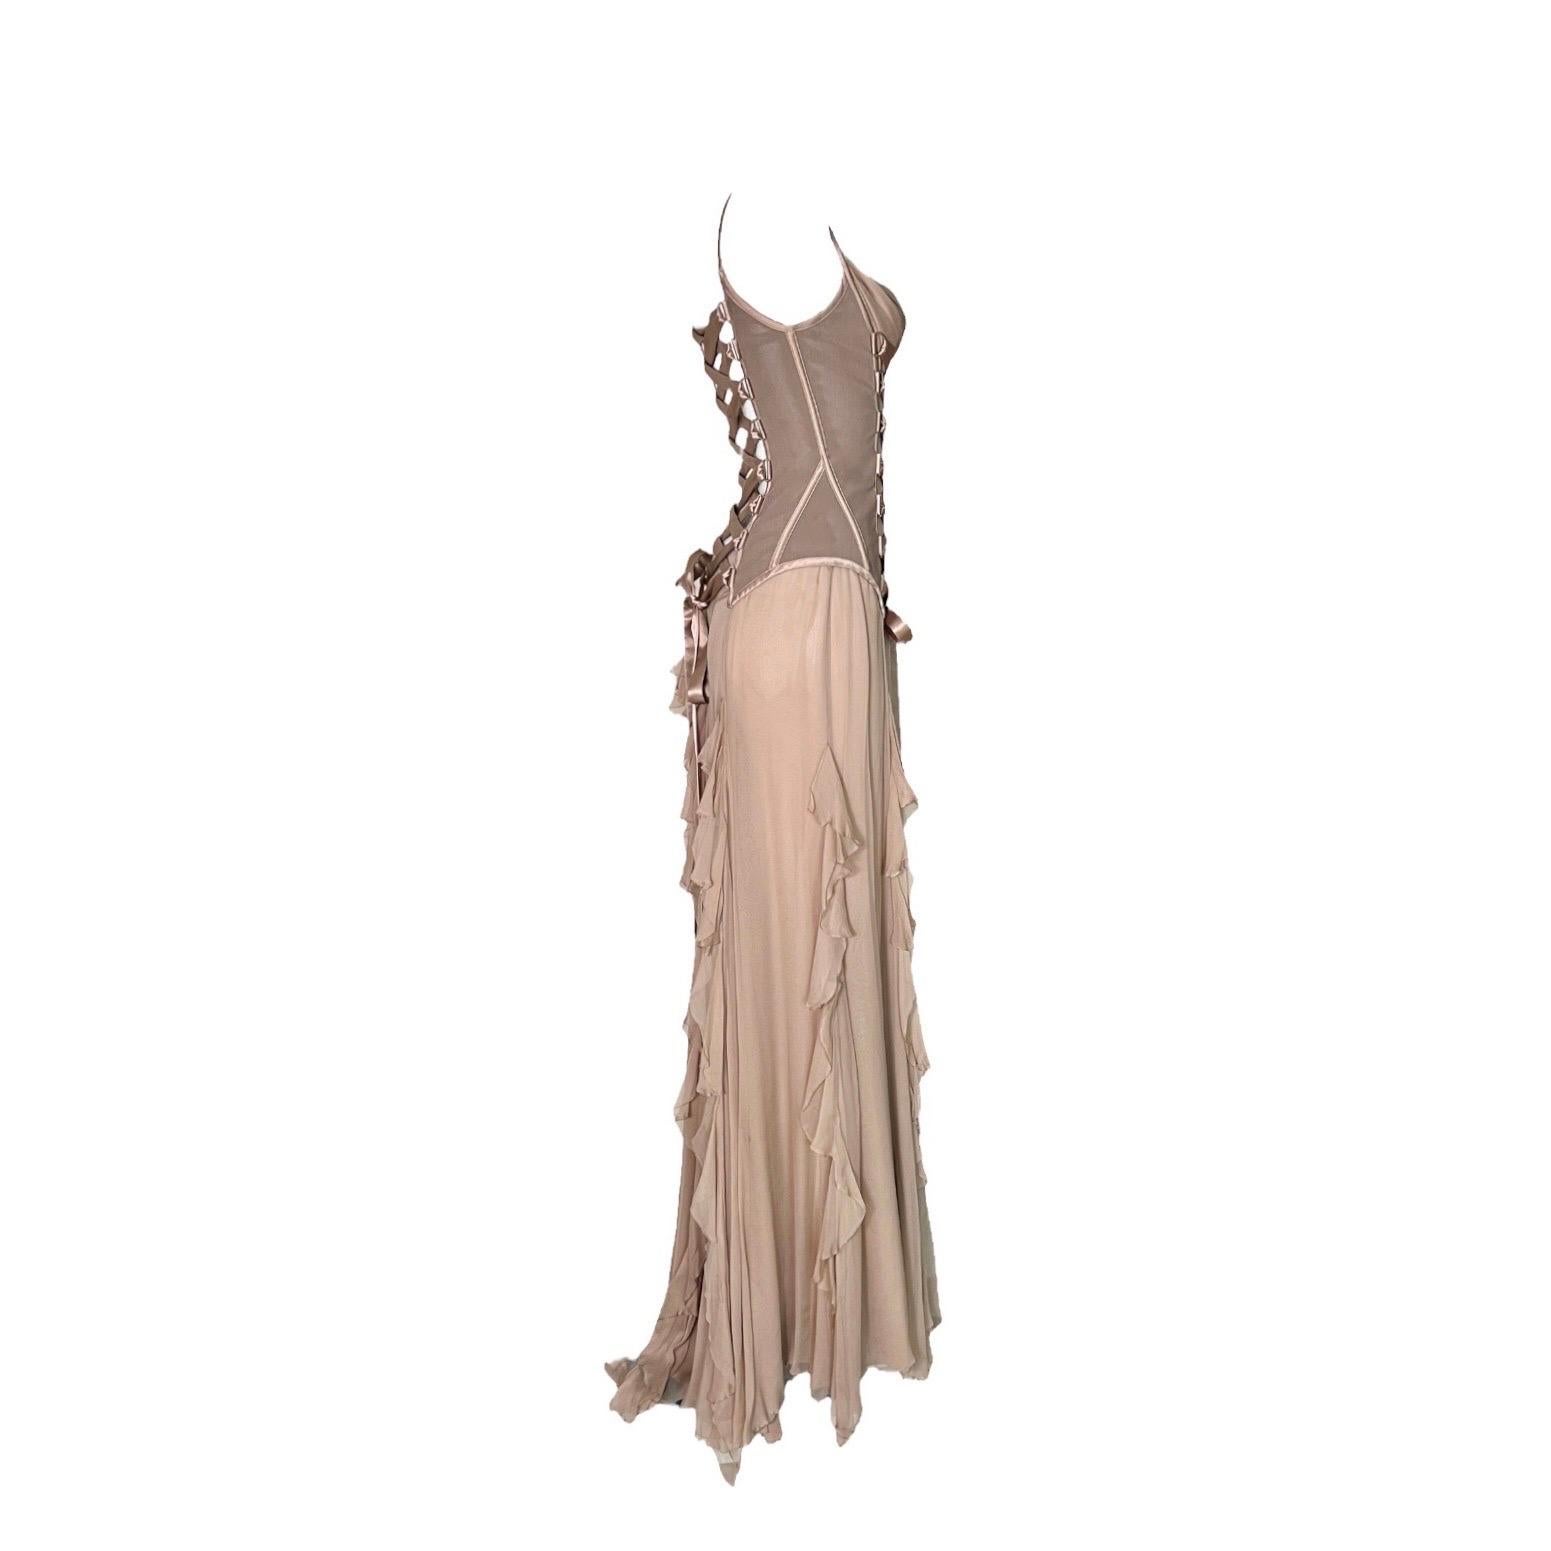 Gorgeous nude evening gown inspired by the Grecian goddesses by VERSACE
Fall 2003/2004 Collection
One of the most famous Versace dresses ever created by Versace - worn by topmodels, photographed by Newton and even Barbie got this dress!
Silk